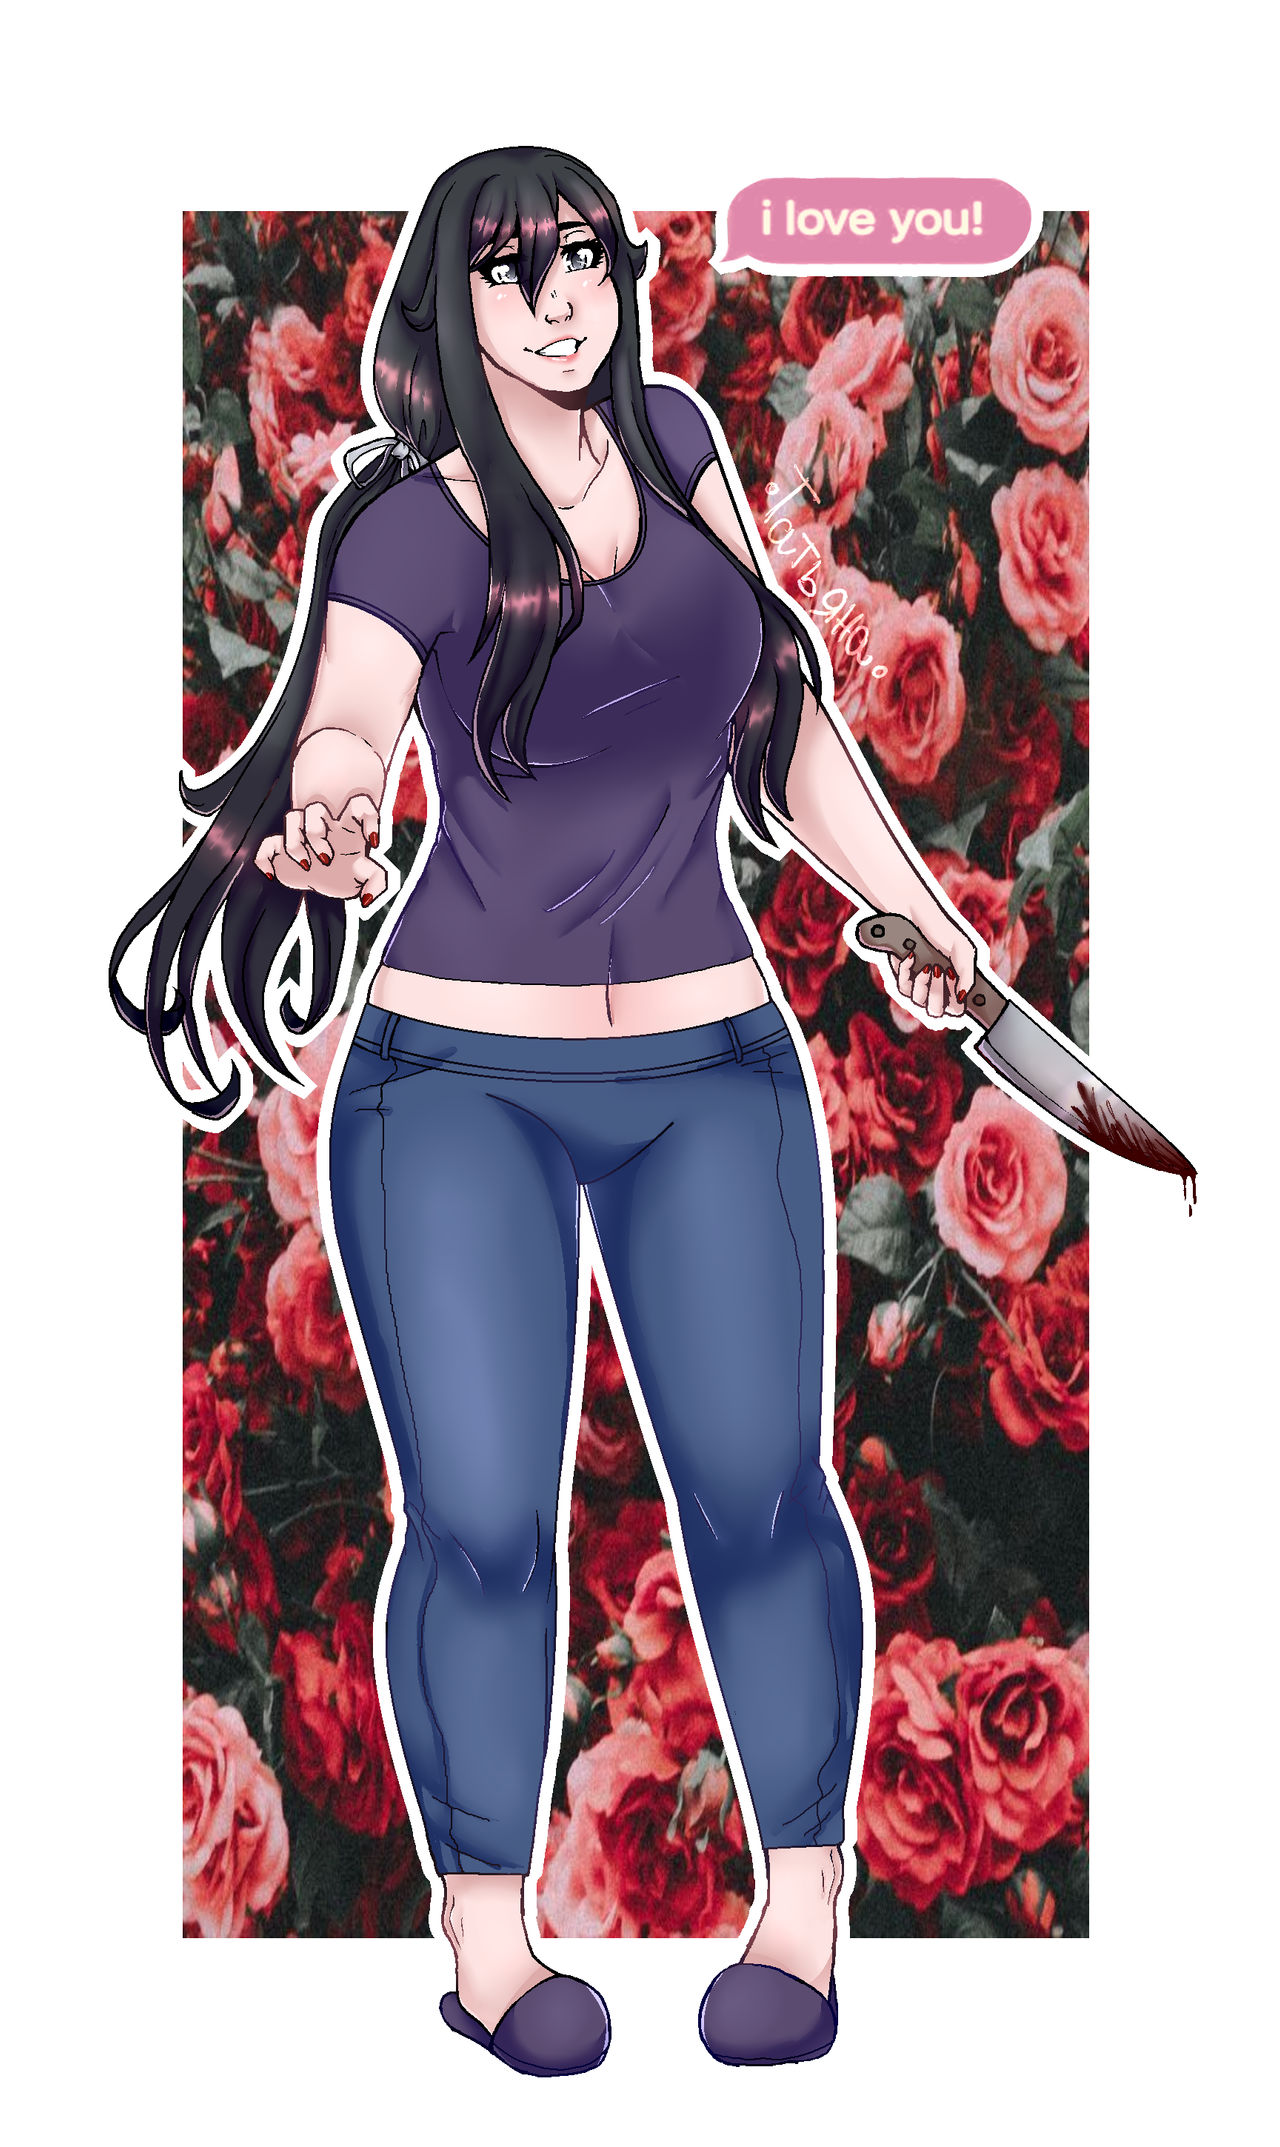 The Vale of the Yandere — Yandere Mommy Long Legs.